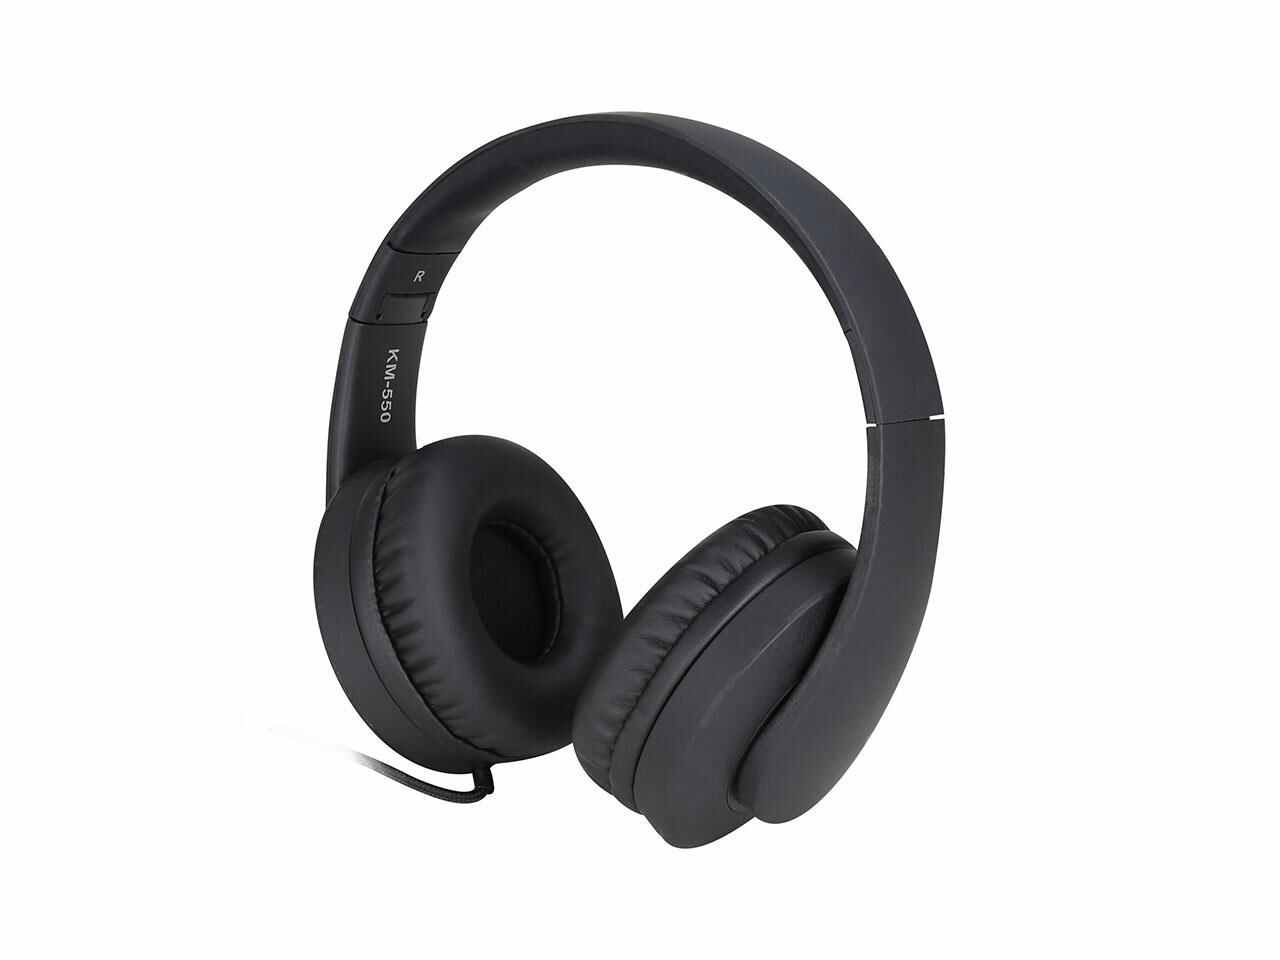 Over Ear Headphones,JNTworld DJ Stereo Headphone Wired Headphone with IN-LINE MIC,Foldable Classic Headset with Handmade Drivers for iPhone and Android Devices